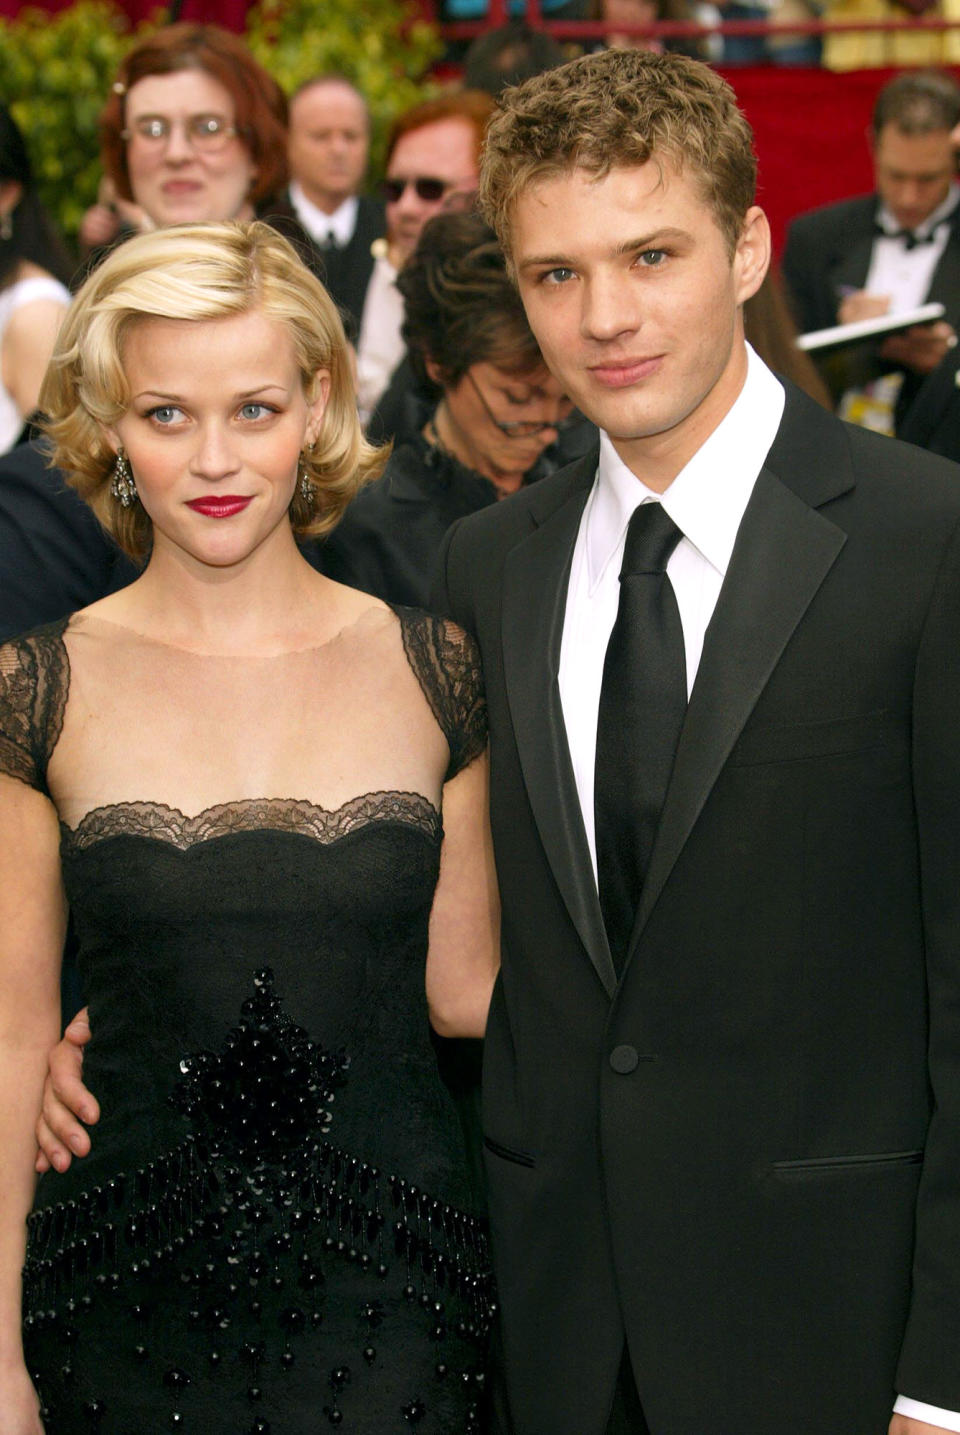 The pair made headlines when Phillippe addressed their pay disparity while presenting with Witherspoon at the 74th Academy Awards. "You make more than I do. Go ahead," the actor replied after his then-wife asked if she could read the winner. Nearly two decades later, Witherspoon admitted she was "flummoxed" by the remark. "I forgot that ever happened. He did say that, and no, it wasn't scripted. He didn't tell me he was going to say that before it happened on air," she explained on the "HFPA in Conversation" podcast. The Legally Blonde star went on to share a story about Ava being "so embarrassed" in 2nd grade by a classmate discussing her mother's success. "I said, 'Don't ever feel ashamed of a woman making money.' There are women all over this world who don't have an opportunity or an education or the ability to make money," she recalled. "The more women who make more money will give more money away, will take care of their societies, will take care of their communities, will do more with that money."